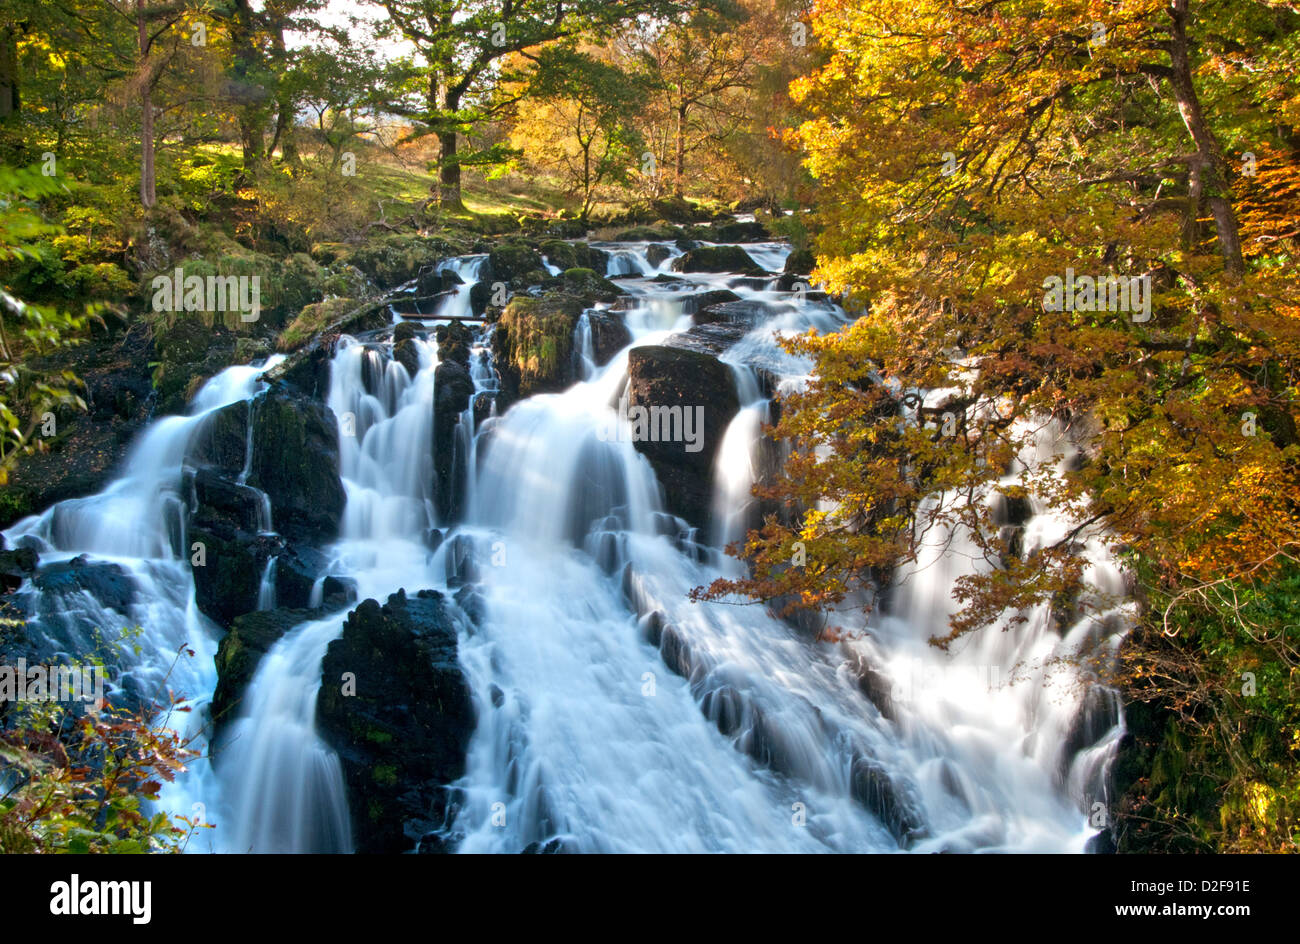 Swallow Falls in Autumn, Near Betws y Coed, Snowdonia National Park, Wales, UK Stock Photo